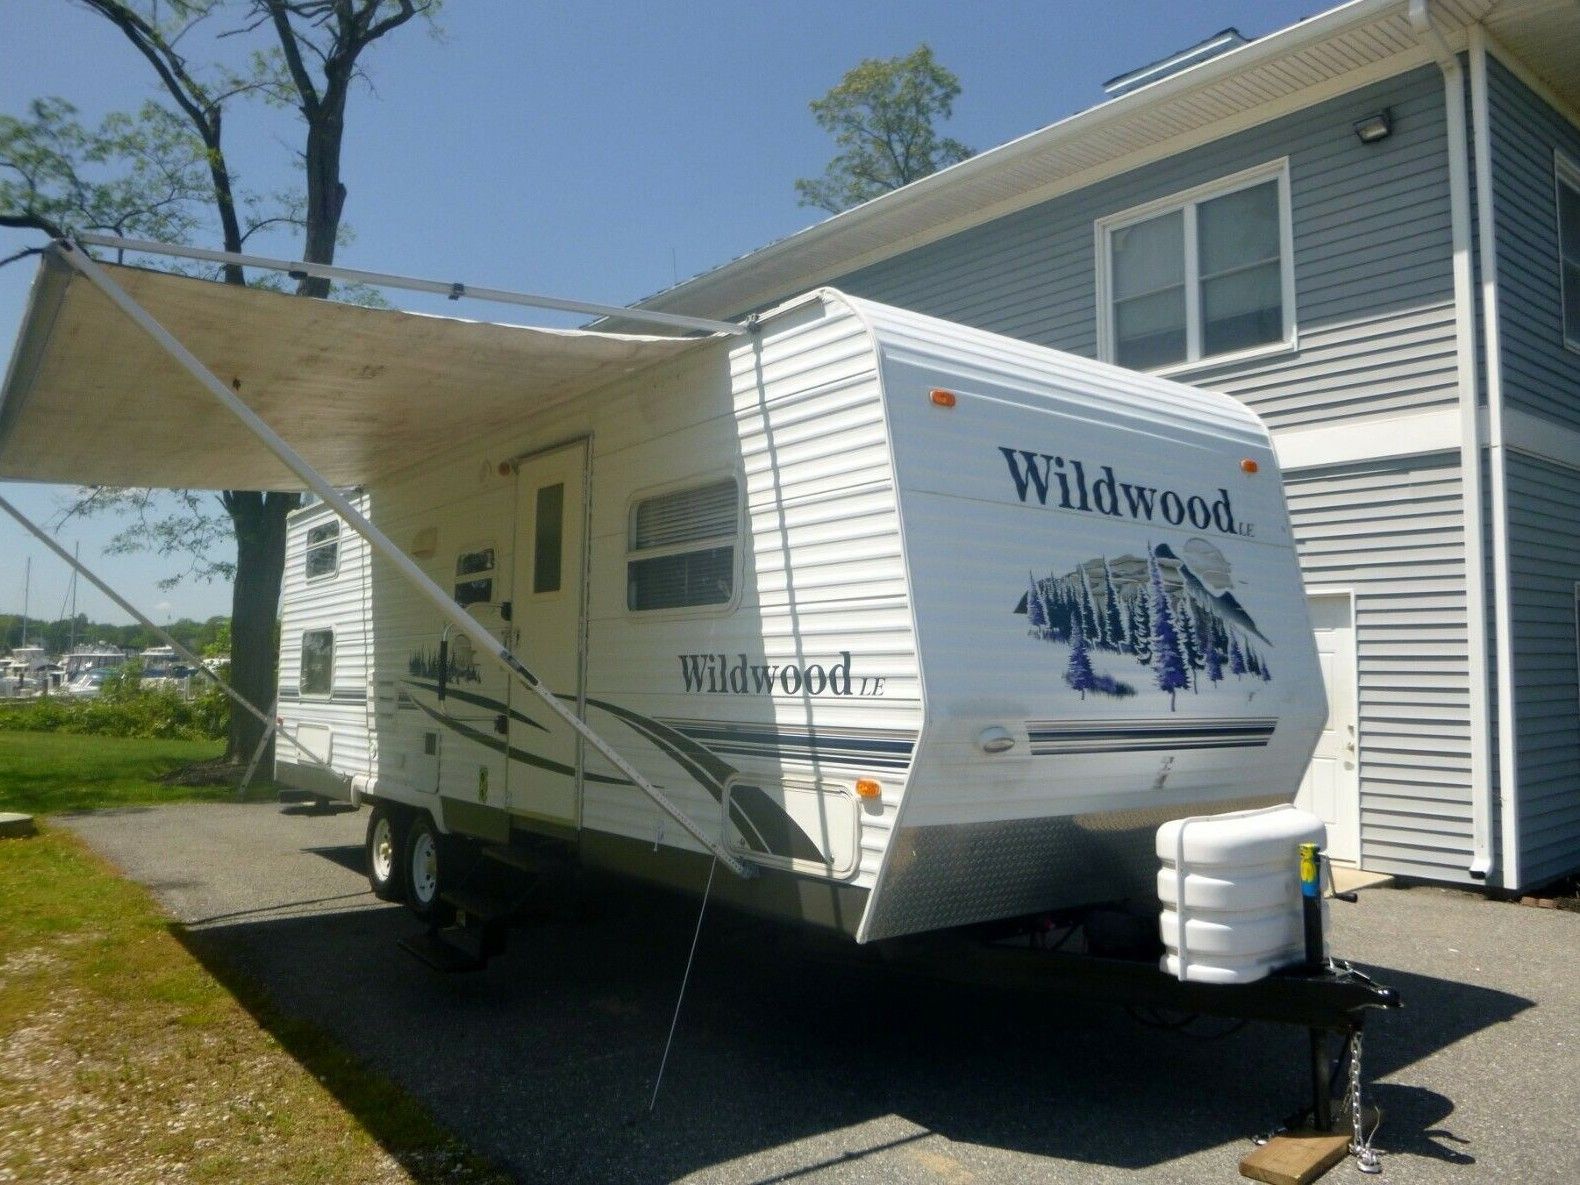 Photo 1000 clean. URGENT FOR SALE 2006 Model WildWood